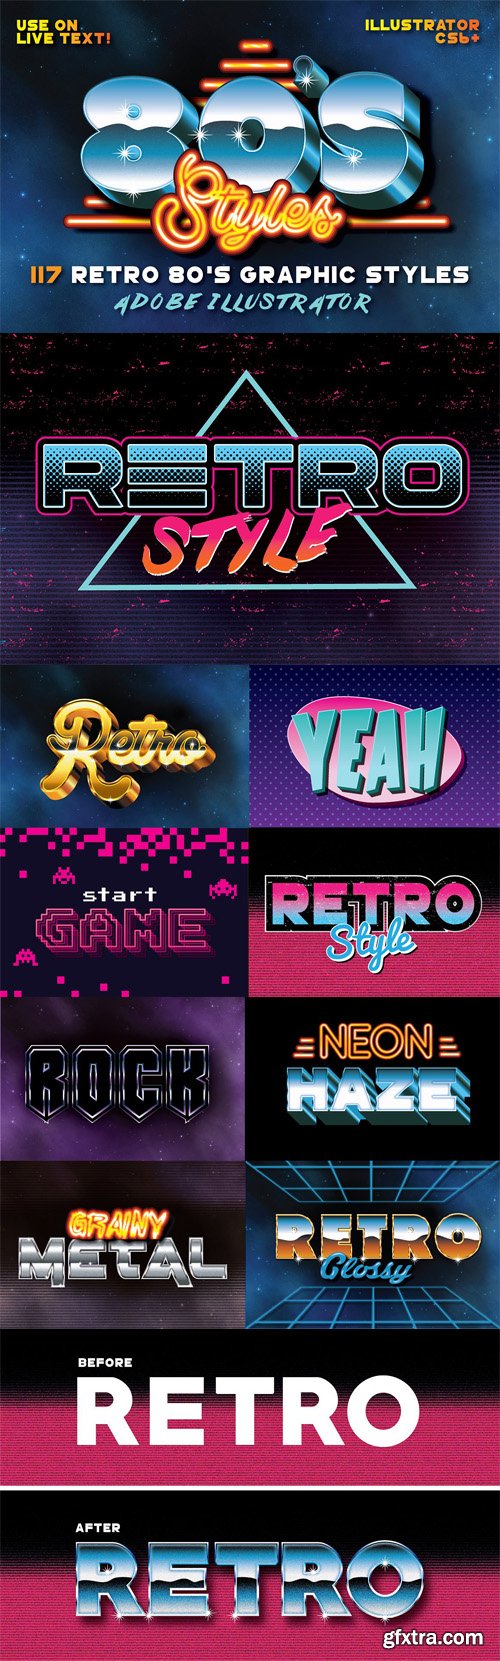 80's Retro Graphic Styles Vector - 117 Crazy Styles [Re-Up]